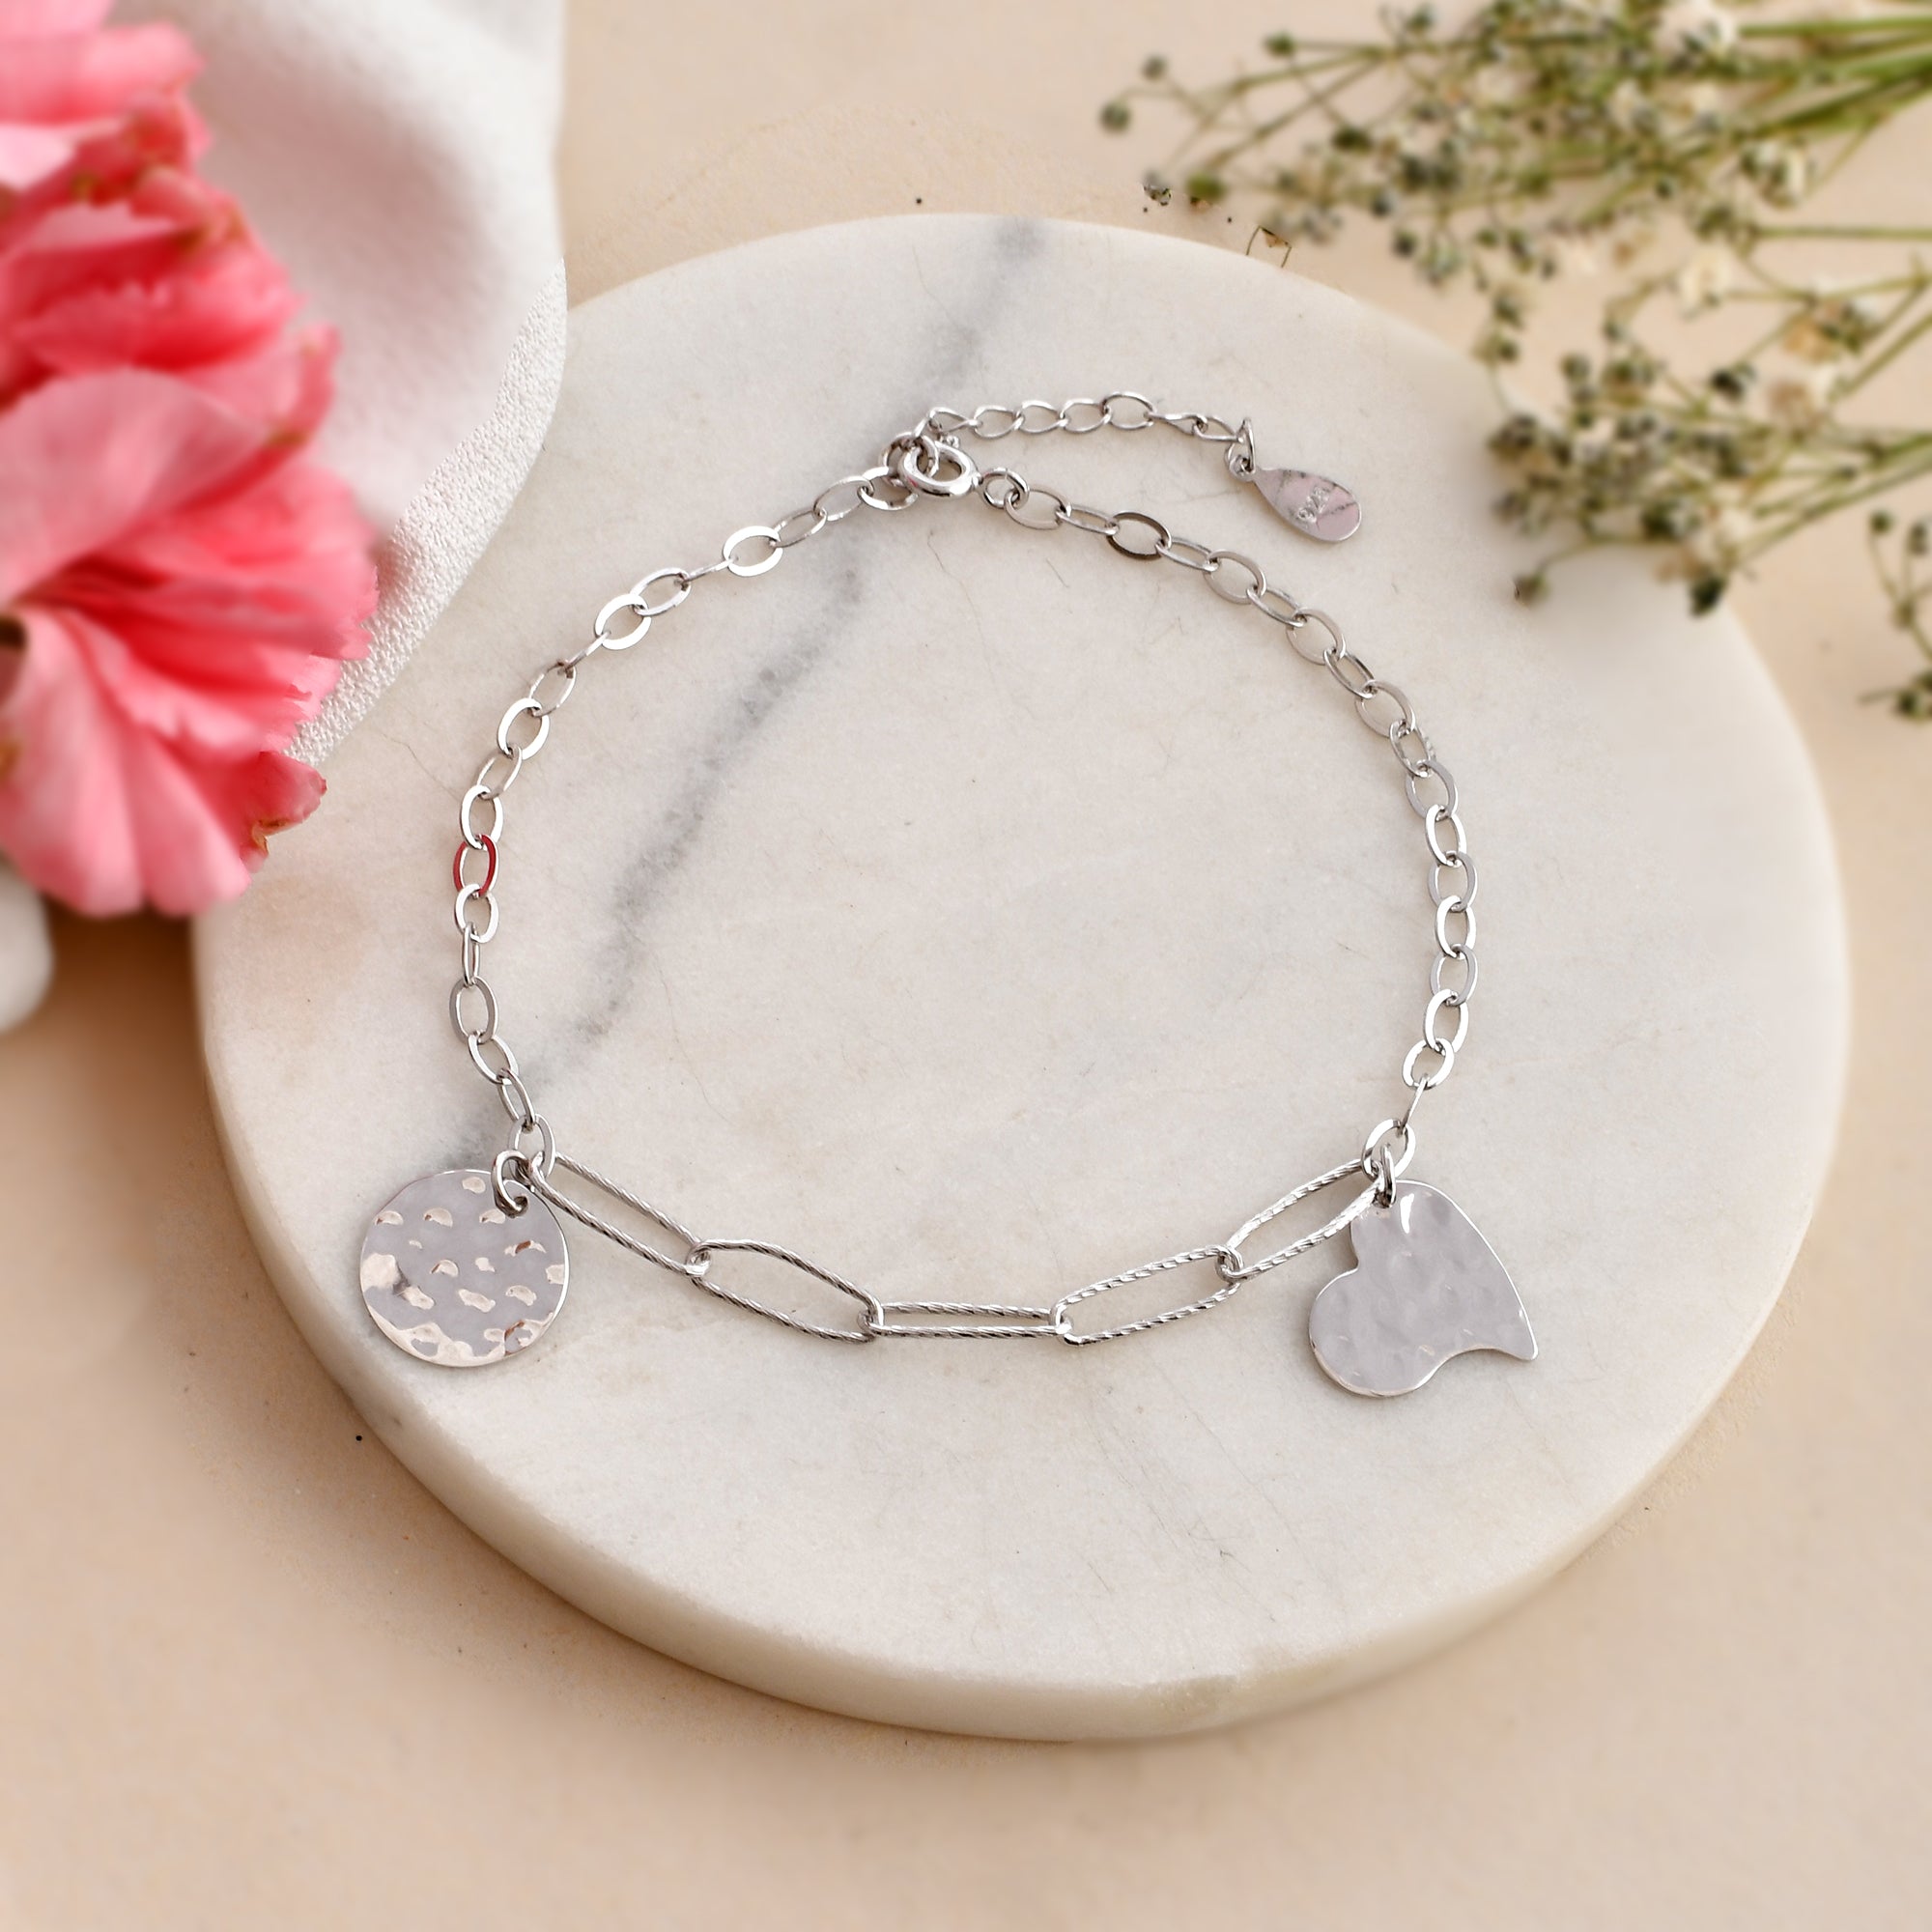 Women's Fashionable Silver Bracelets With Rhinestone For Bride (M80268) -  Wedding & Party Jewelry - FeelTimes